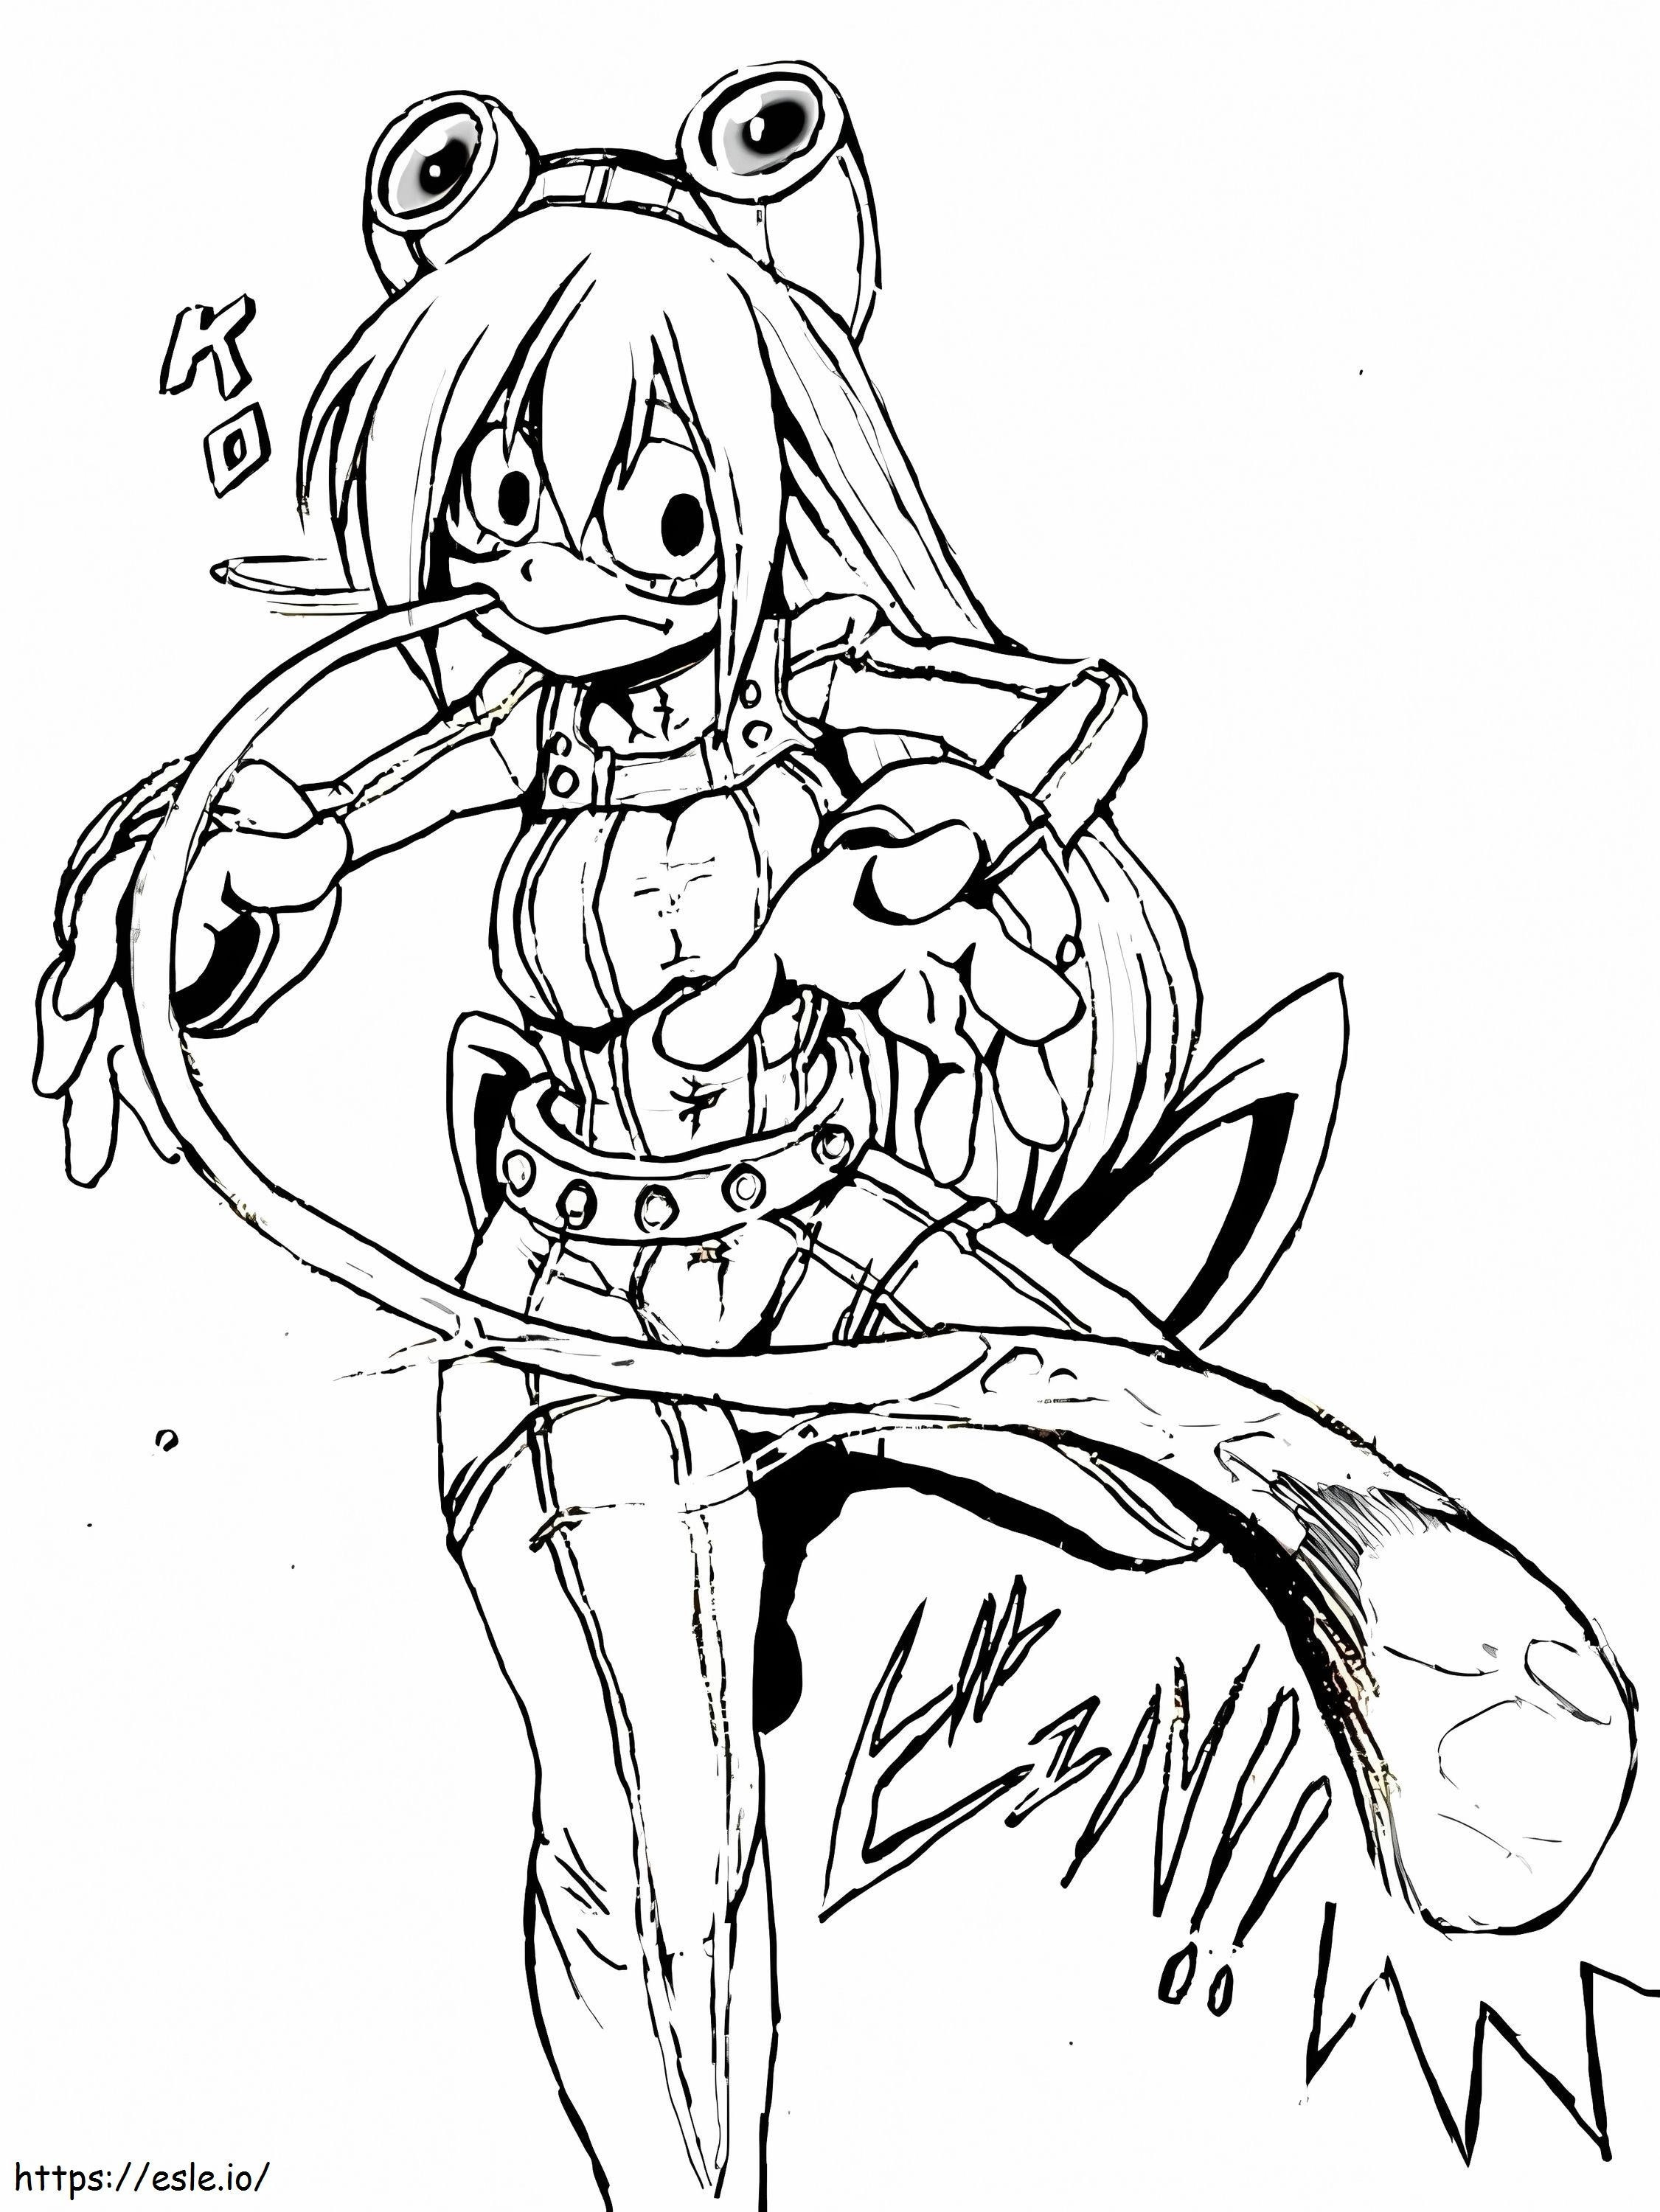 Tsuyu Asui Is Cool coloring page